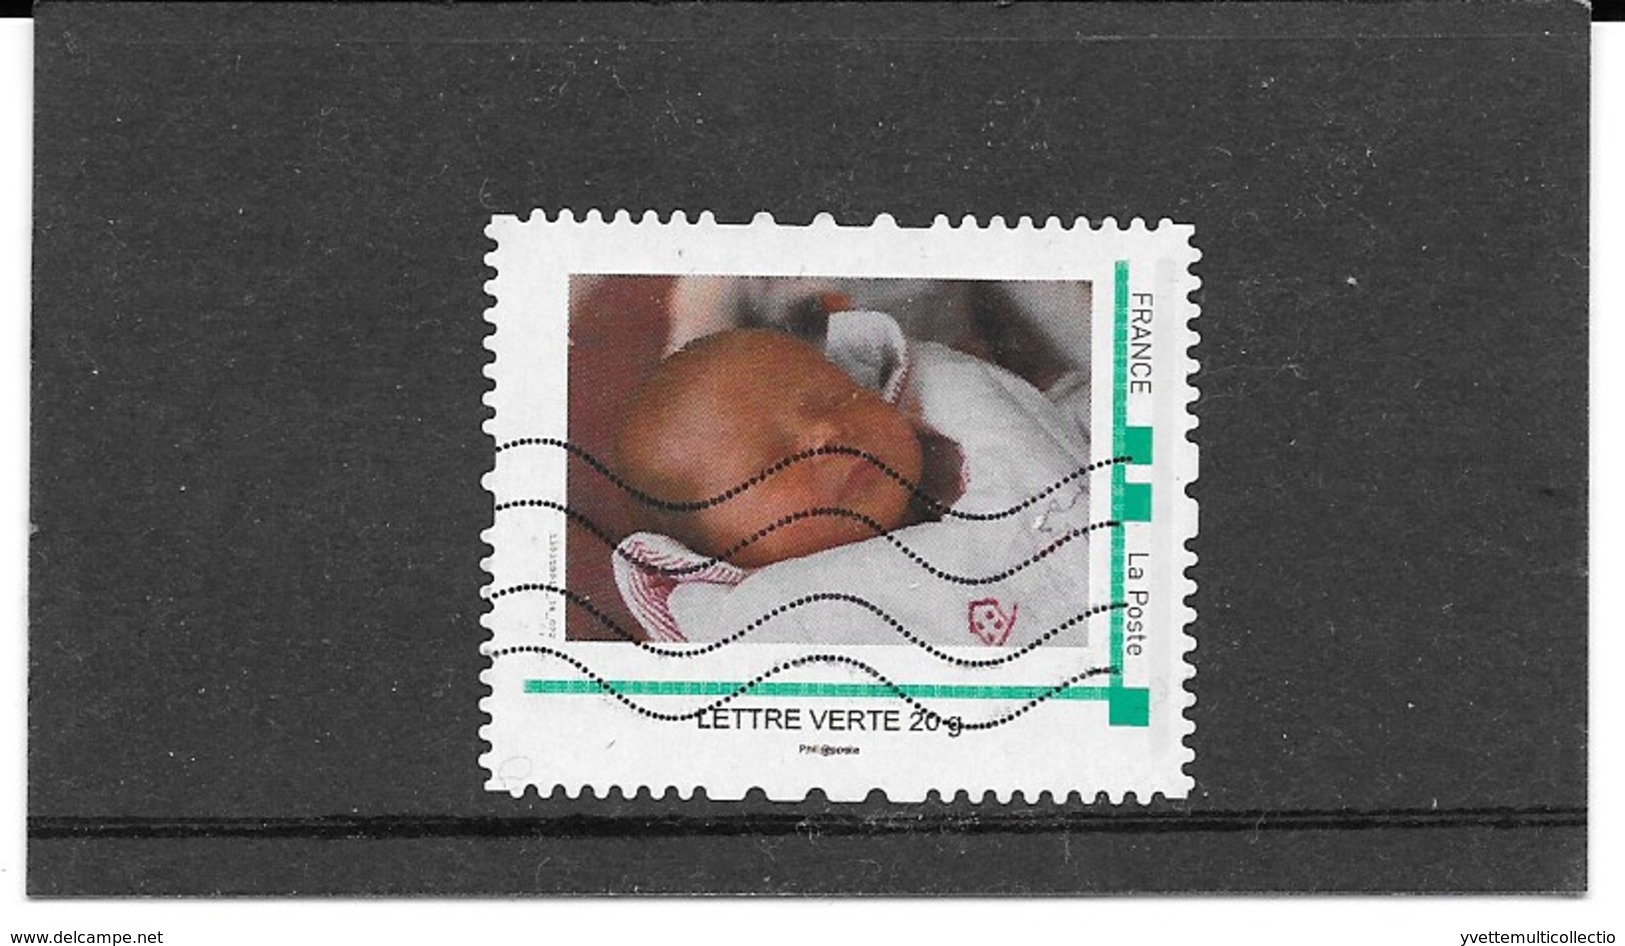 FRANCE.TIMBRE COLLECTOR MONTIMBRAMOI PERSONNALISE OBLITERE " NAISSANCE ".MONTIMBRAMOI. LETTRE VERTE 20 G - Usados